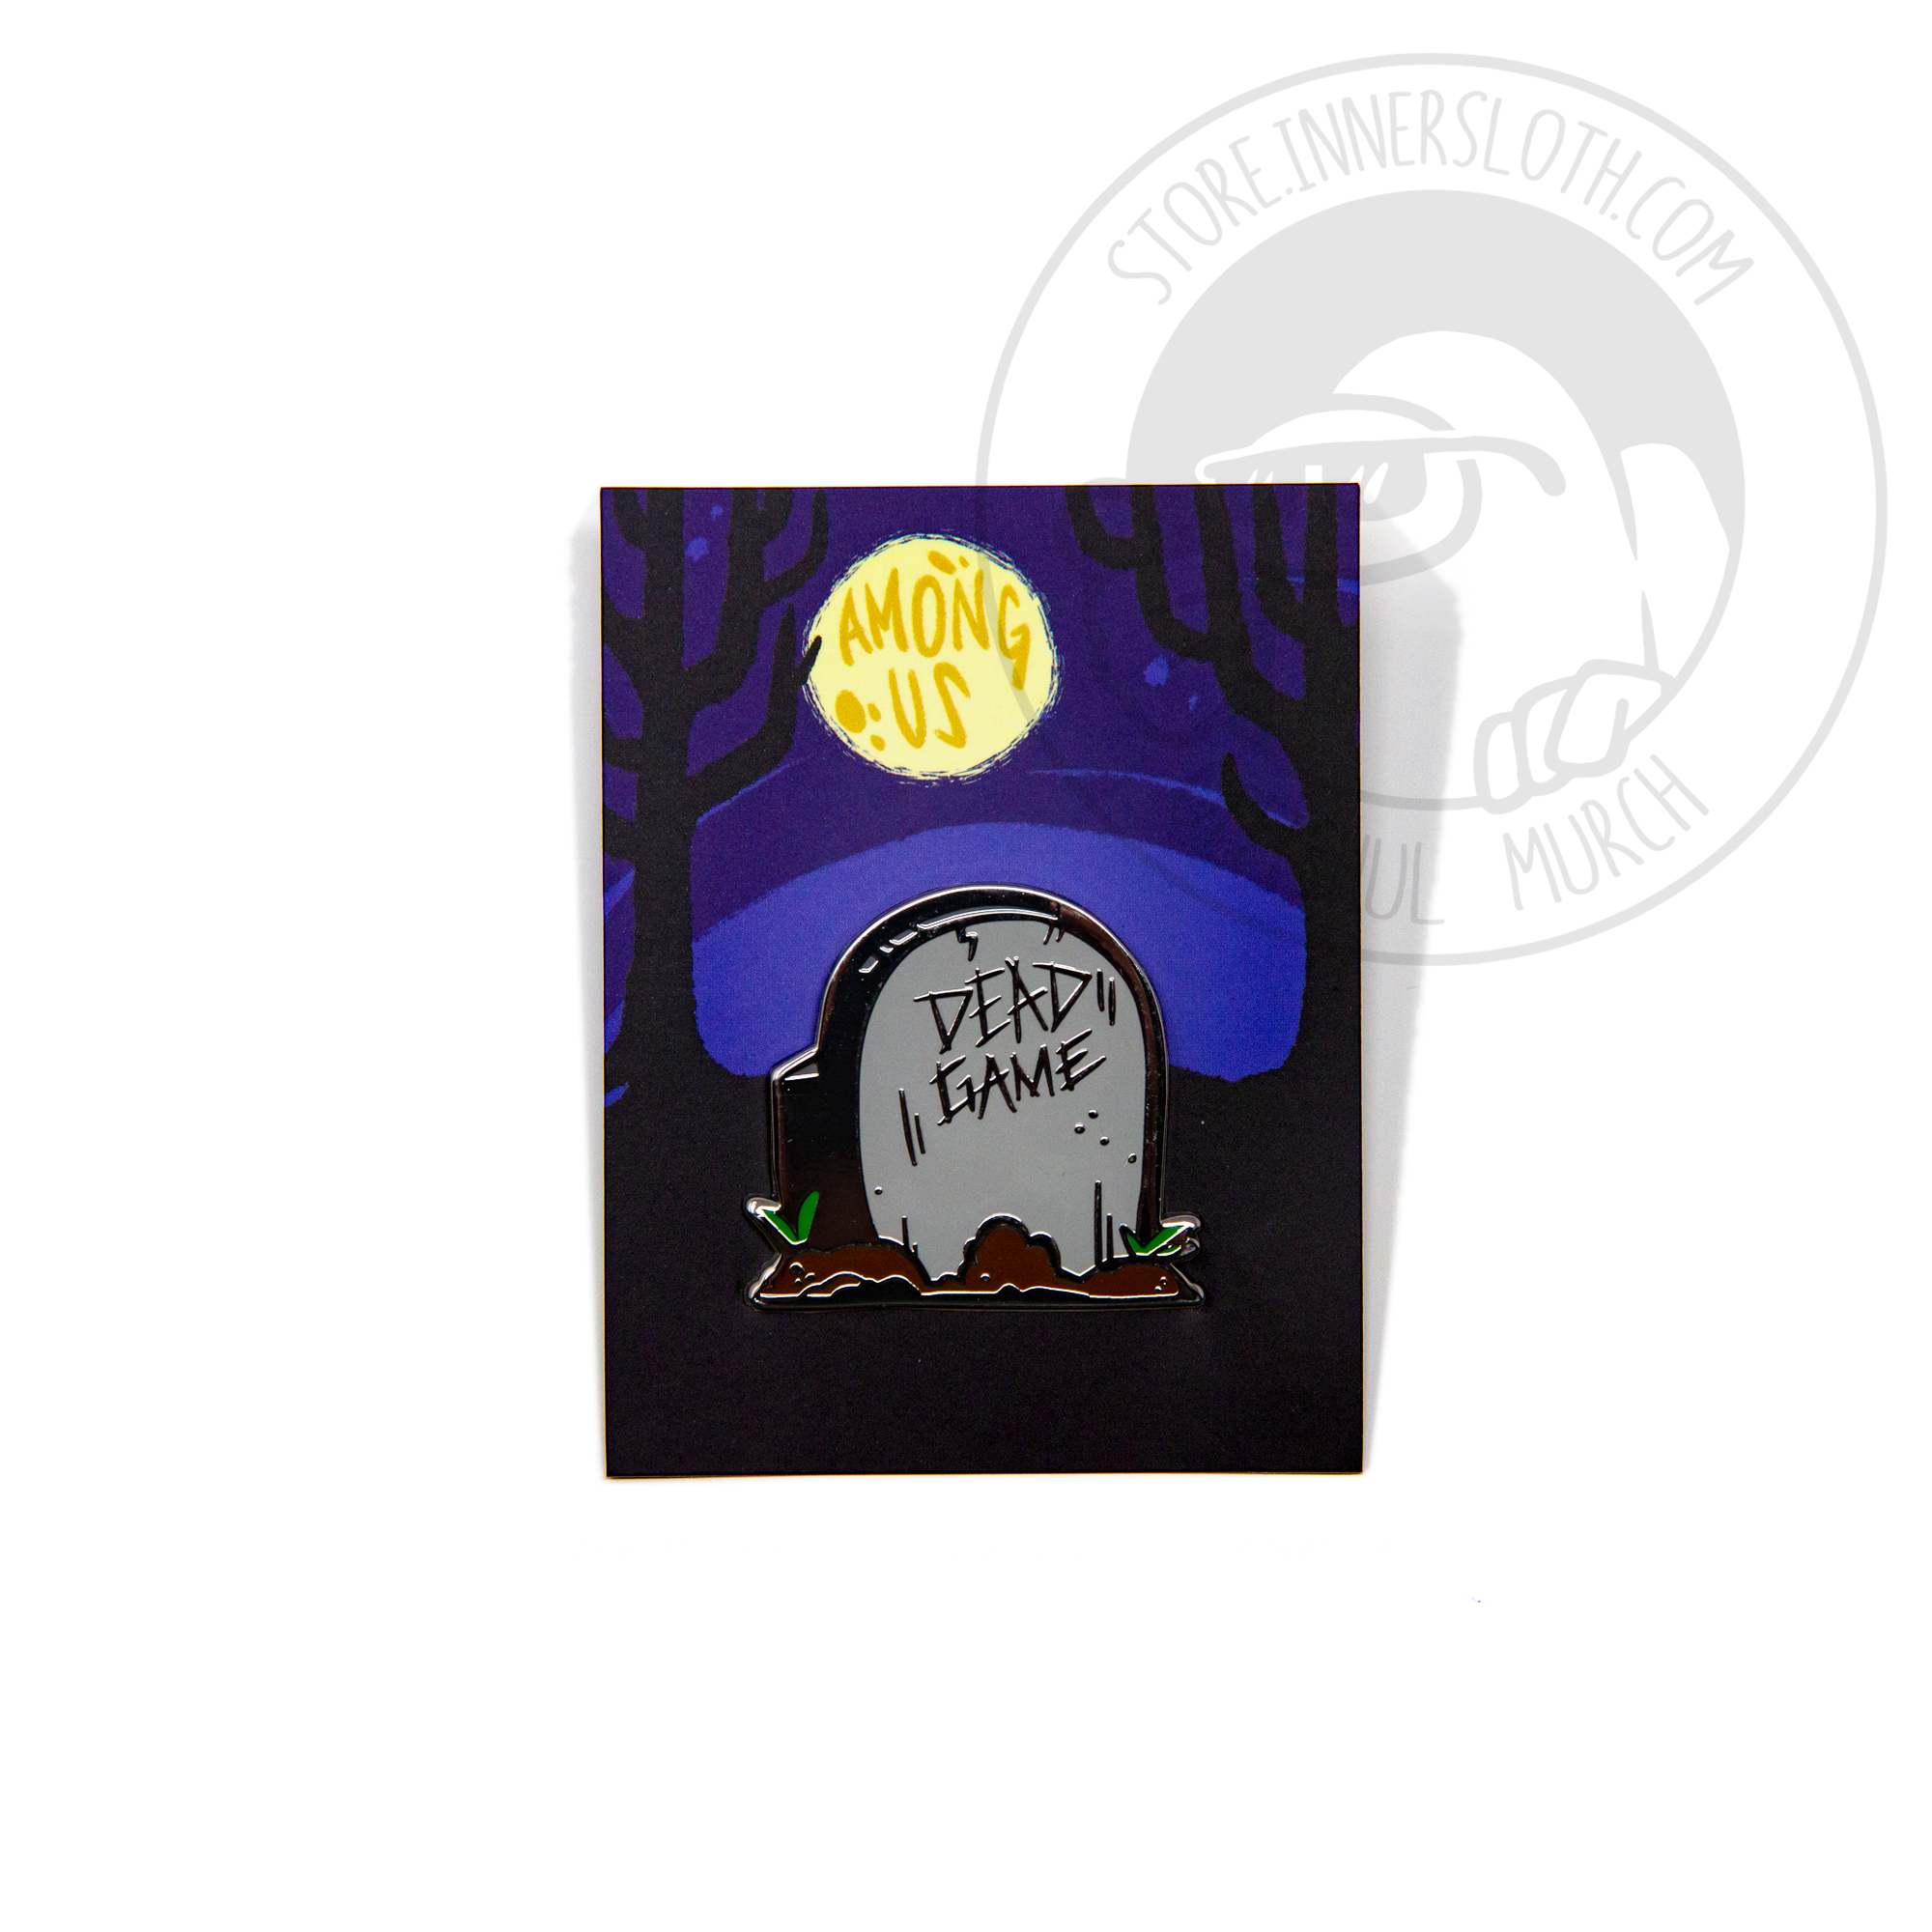 A product photo of a hard enamel pin depicting a grey headstone surrounded by small mounds of fresh dirt and grass sprouts. The headstone is vaguely crewmate-shaped, and reads “DEAD GAME.”